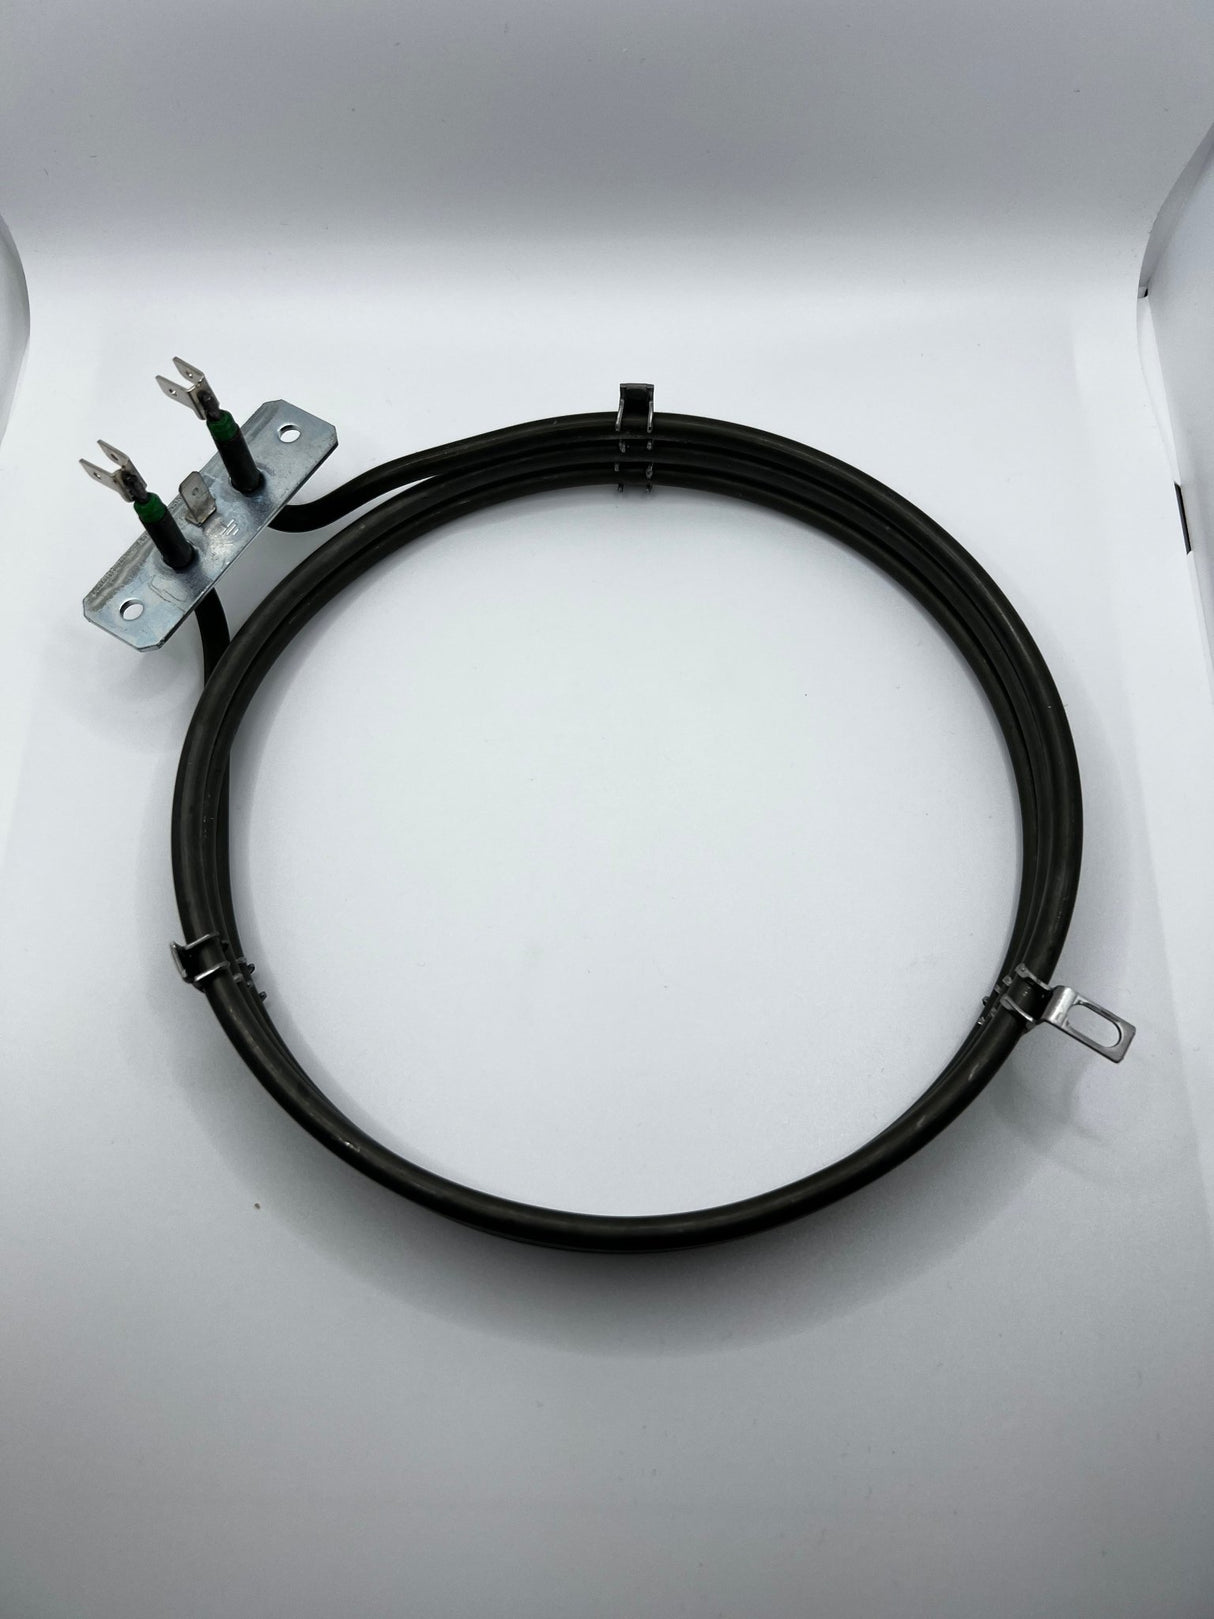 Baumatic 3000W Fan Forced Oven Element 606045 GLO101-02 - My Oven Spares-Baumatic-GLO101-02-3